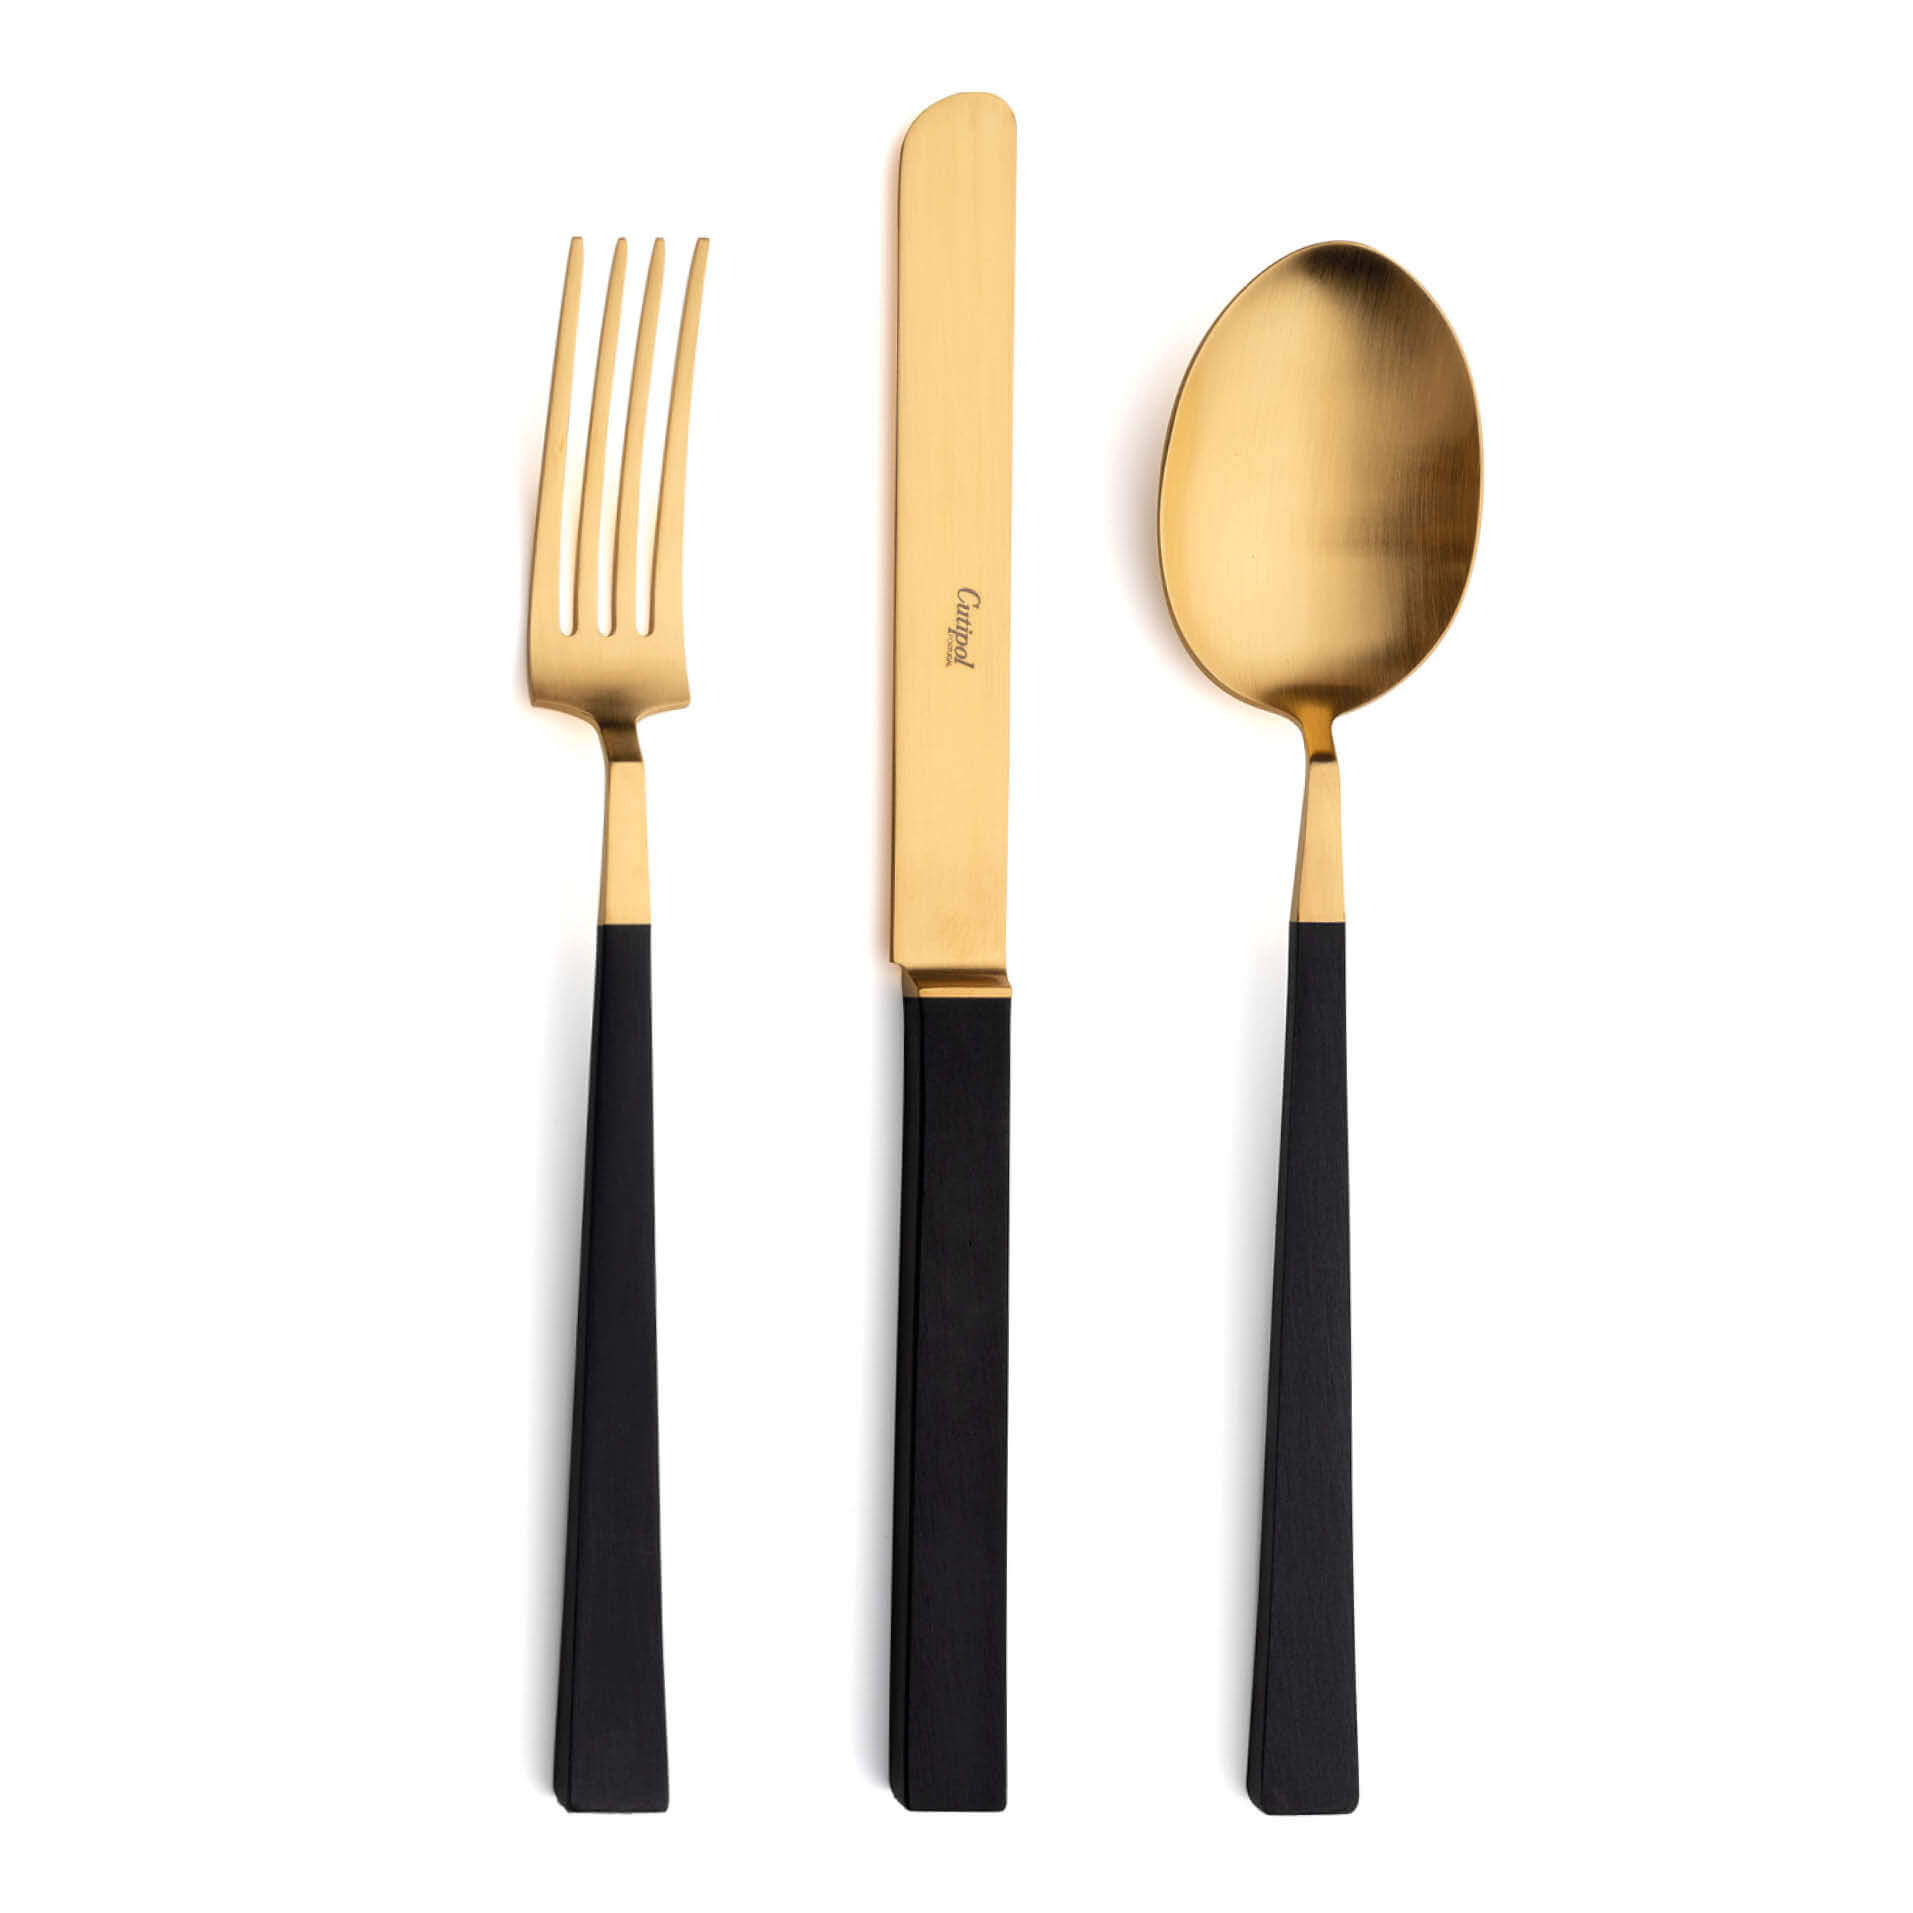 Cutipol Cutlery Kube Gold with dinner fork, dinner knife, table spoon